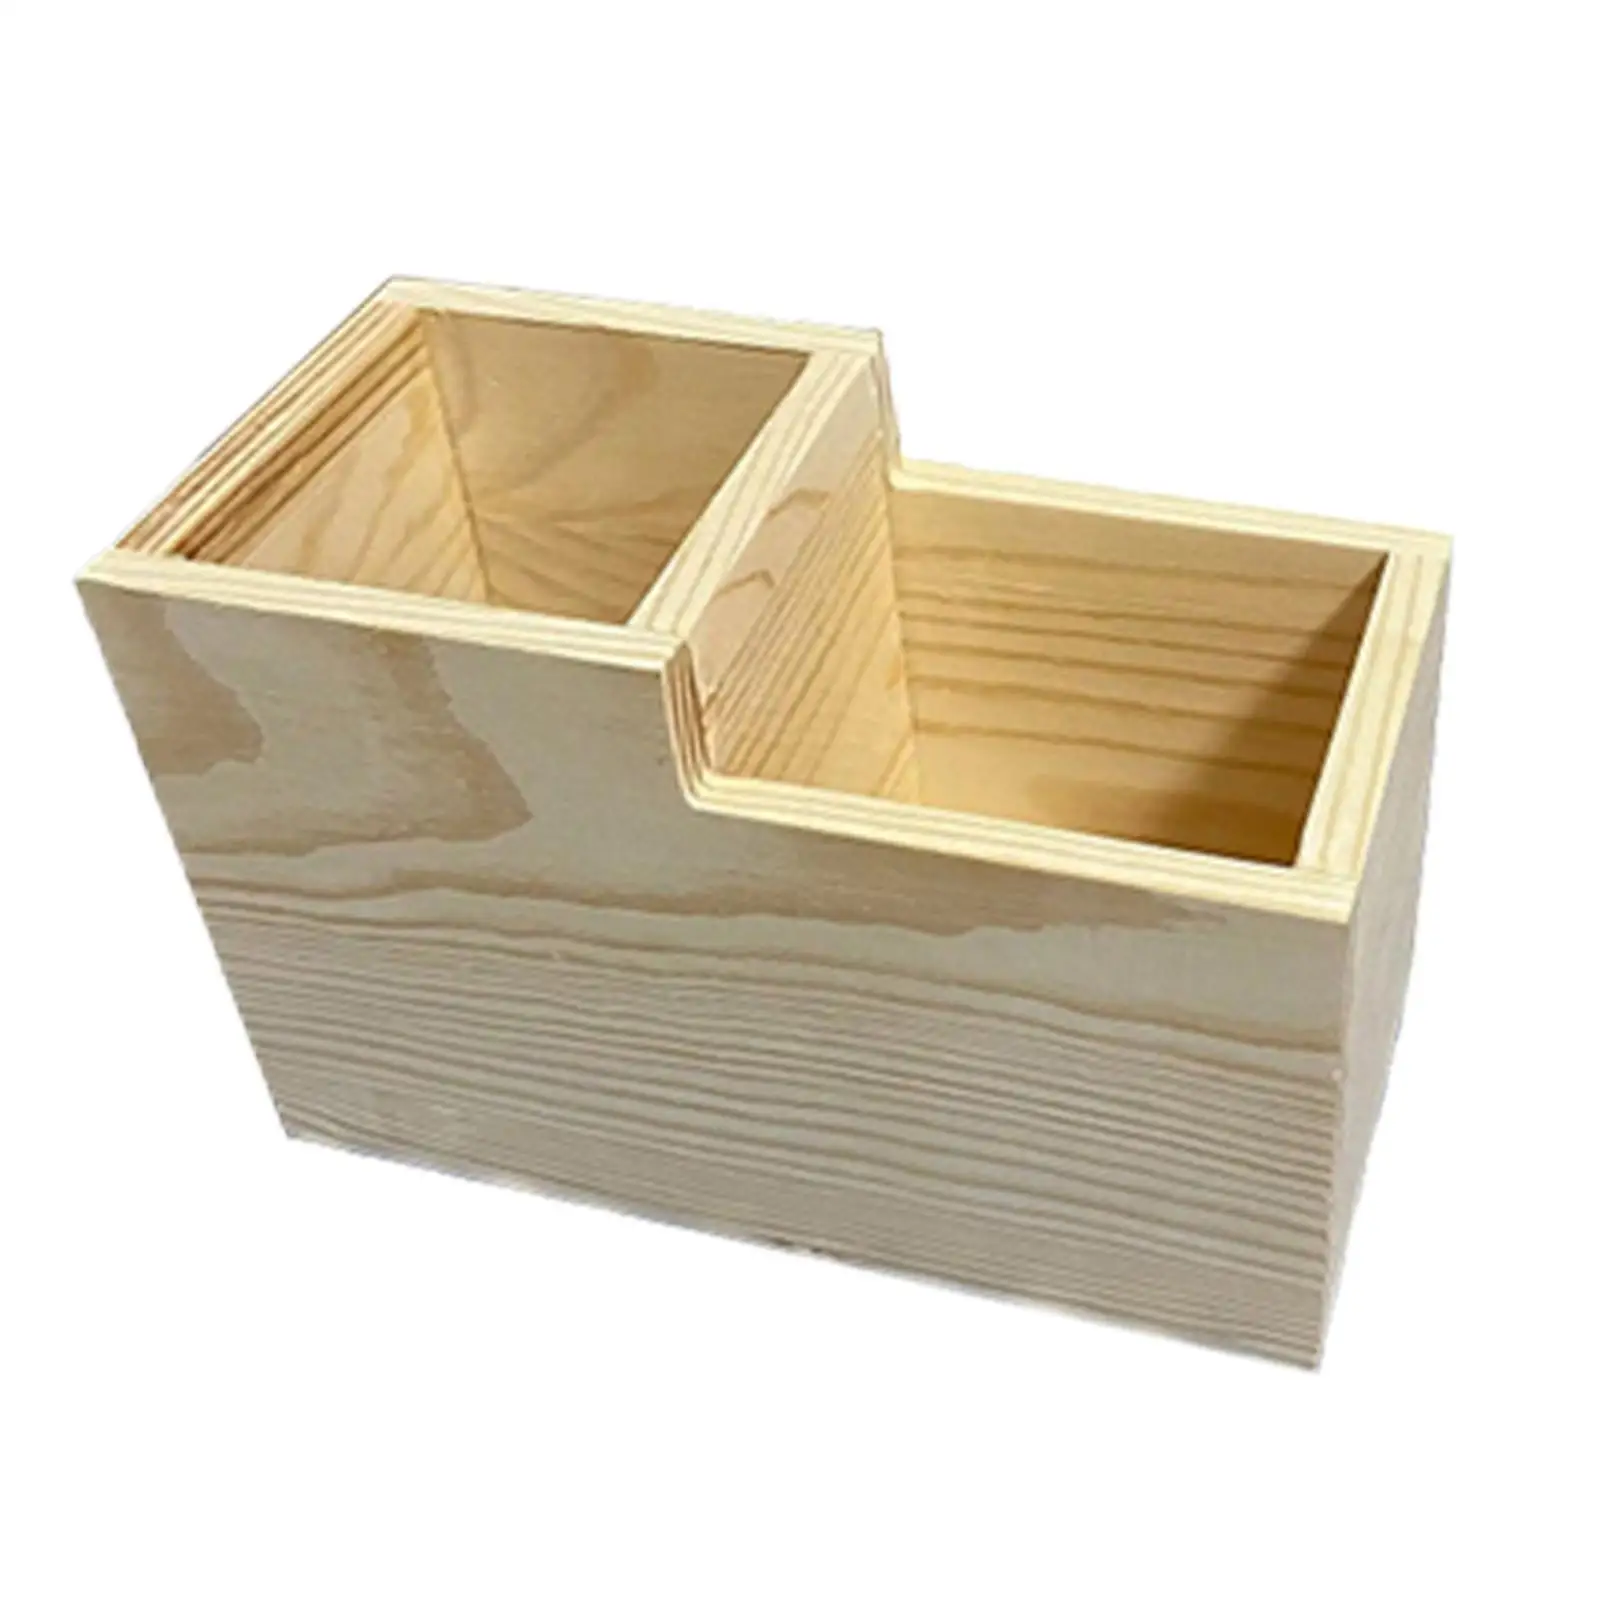 Wooden Makeup Organizer Jewelry Container Thick for Table Bathroom Kitchen